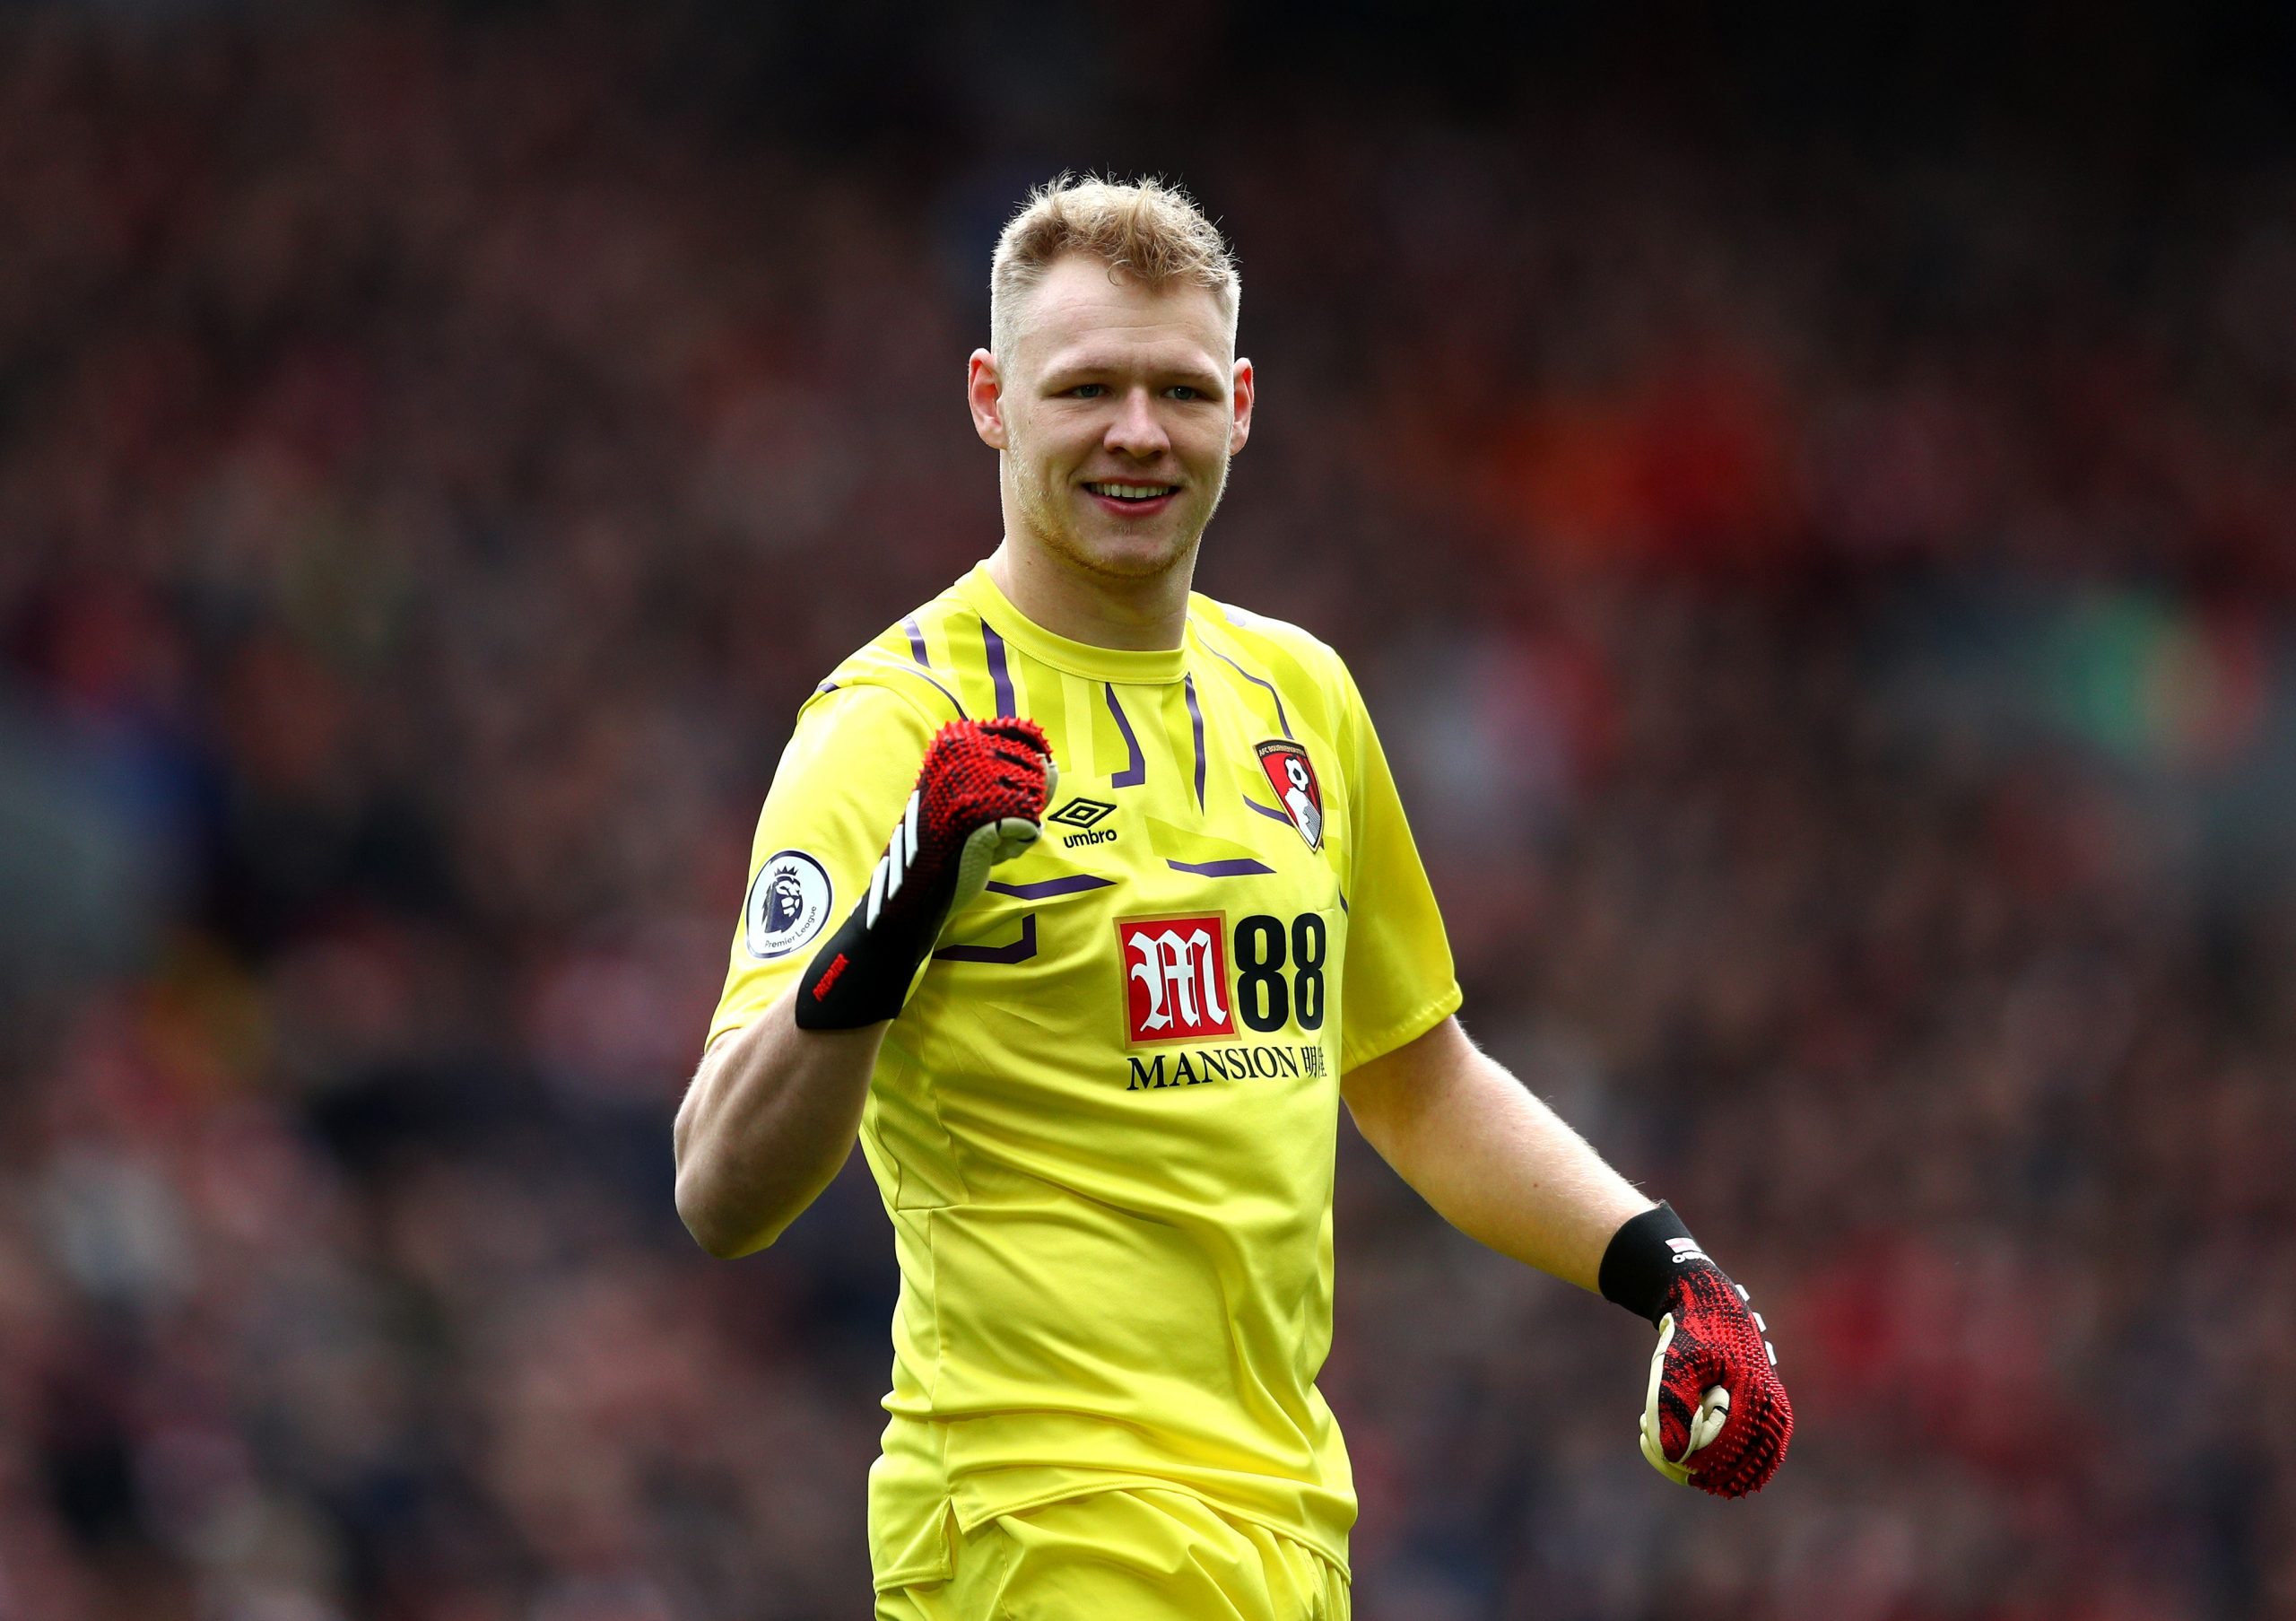 LIVERPOOL, ENGLAND - MARCH 07: Aaron Ramsdale of AFC Bournemouth celebrates his sides first goal during the Premier League match between Liverpool FC and AFC Bournemouth  at Anfield on March 07, 2020 in Liverpool, United Kingdom. (Photo by Jan Kruger/Getty Images)